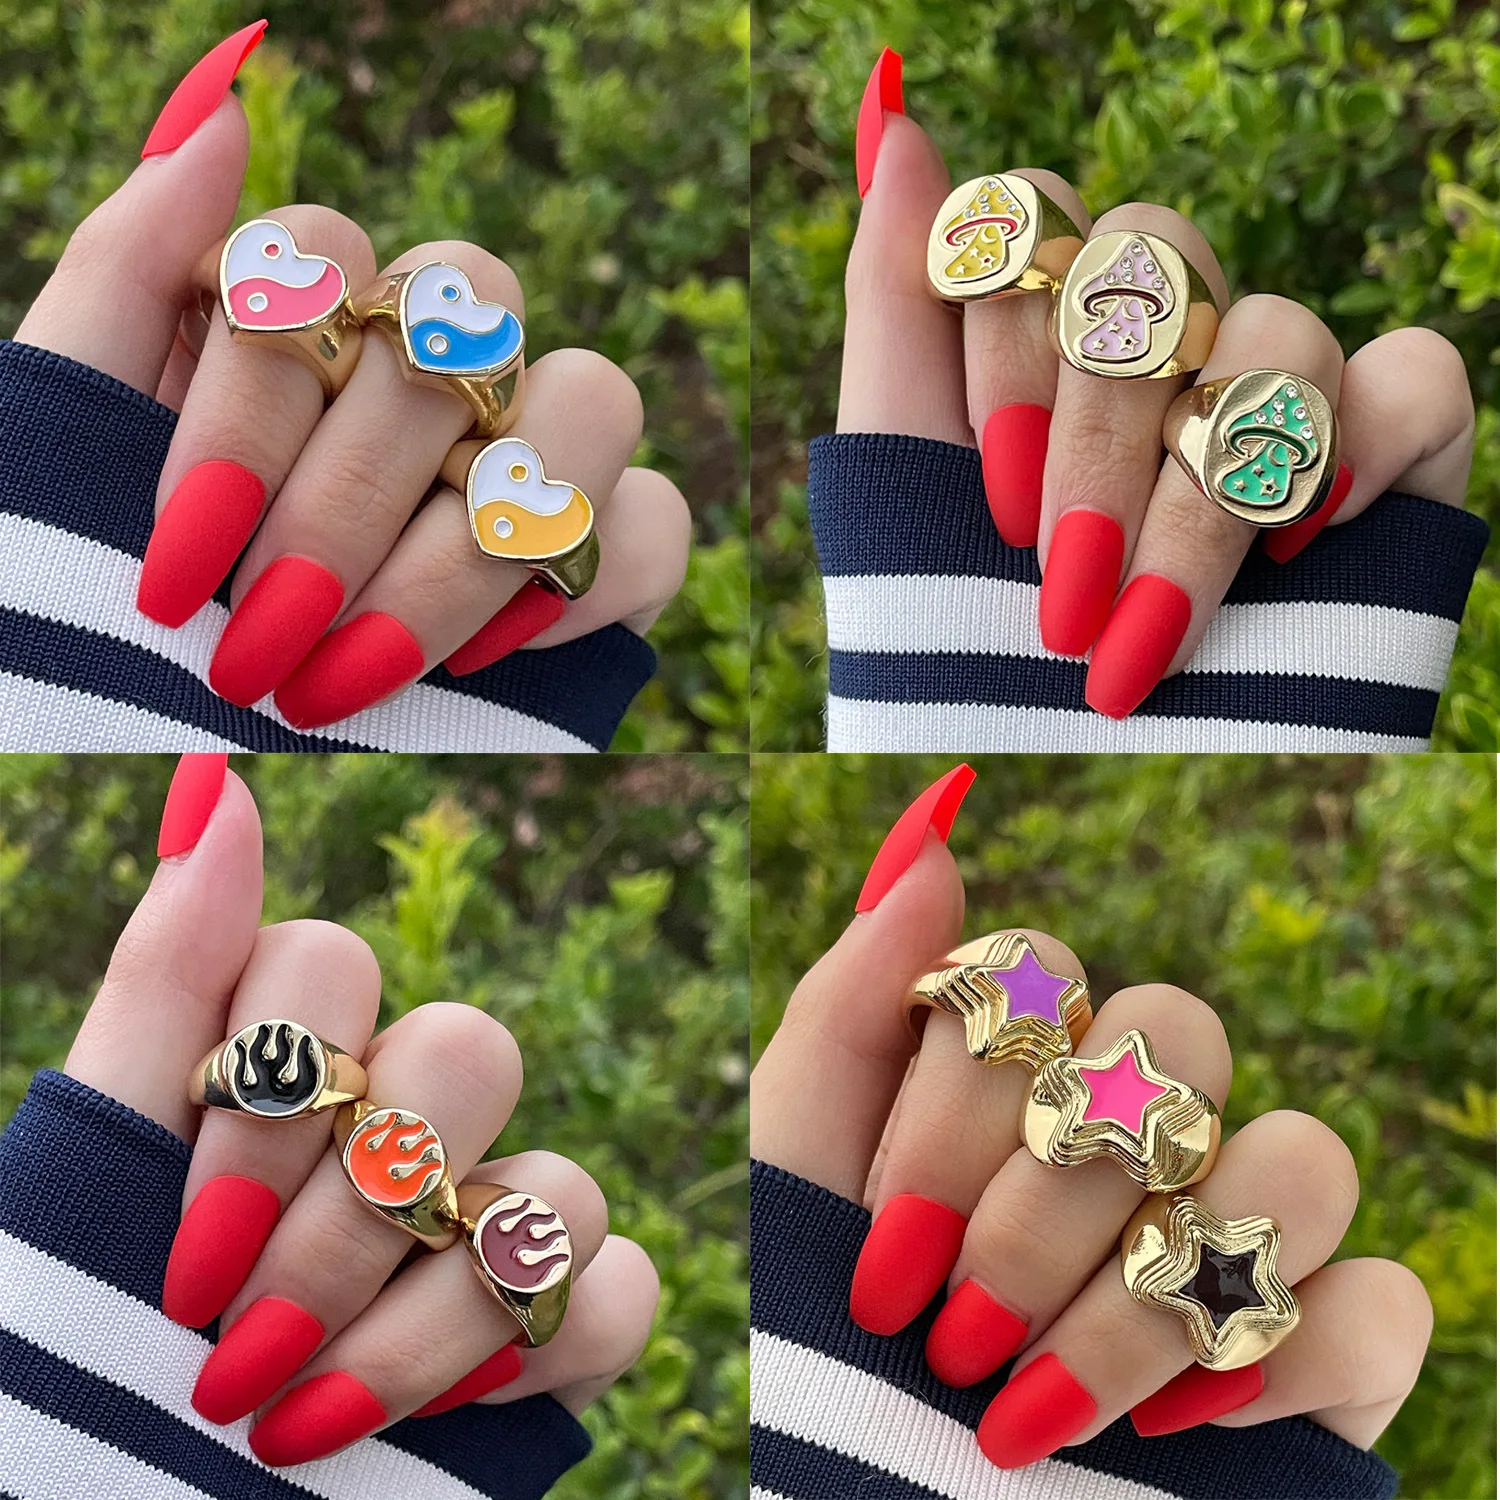 

2022 Creative Daisy Tai Chi Aesthetic Women Man Ring Jewelry Opening Adjustable Female Finger Rings Accessoris Friends Gifts Hot